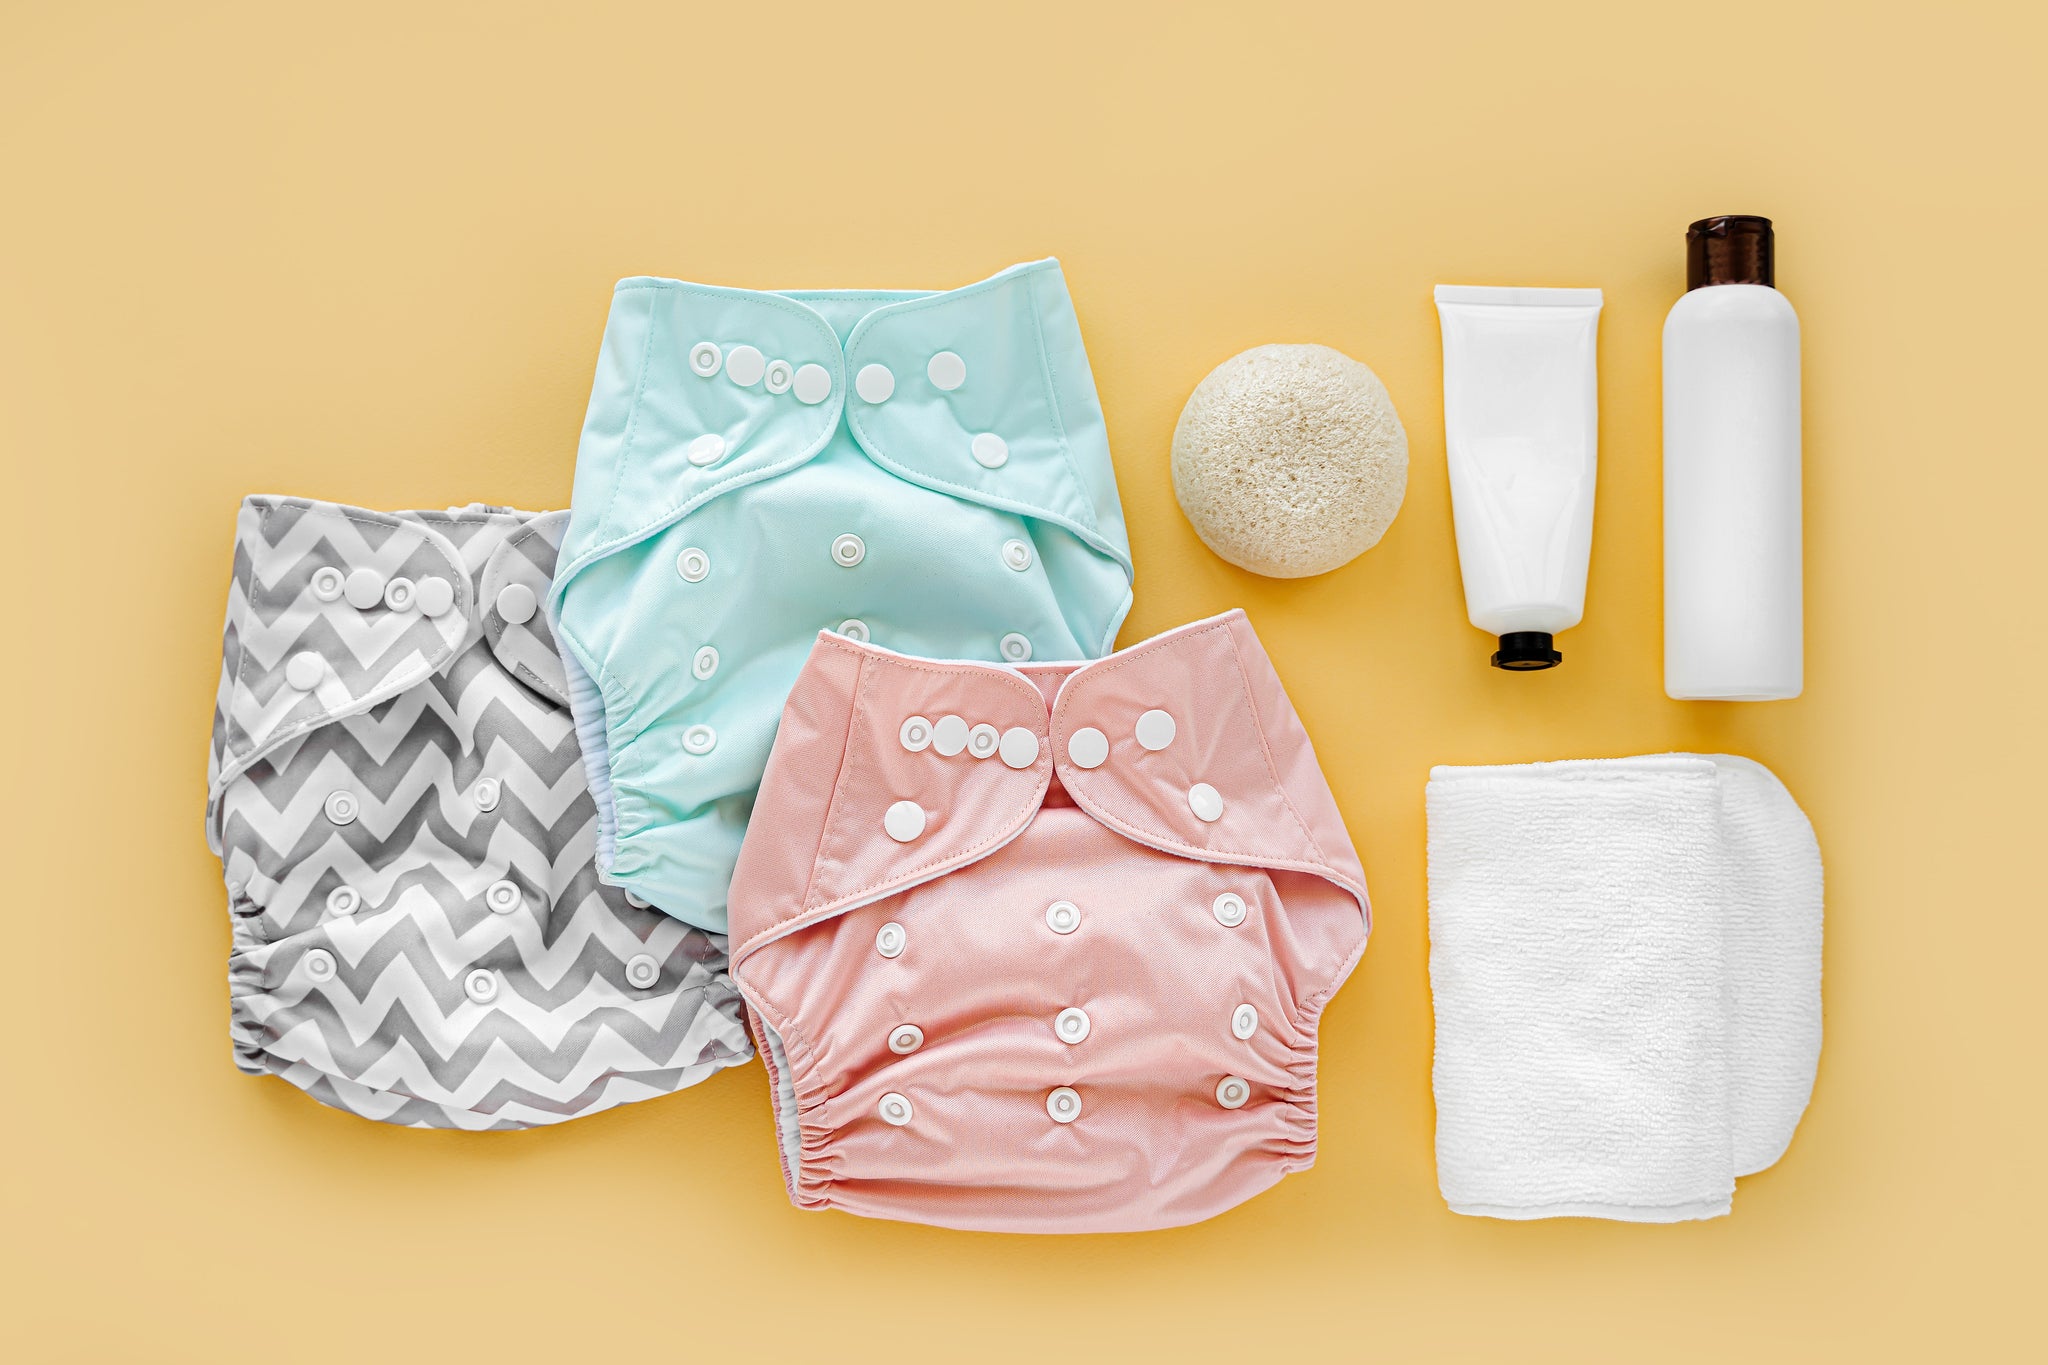 swim diapers and cleaning materials